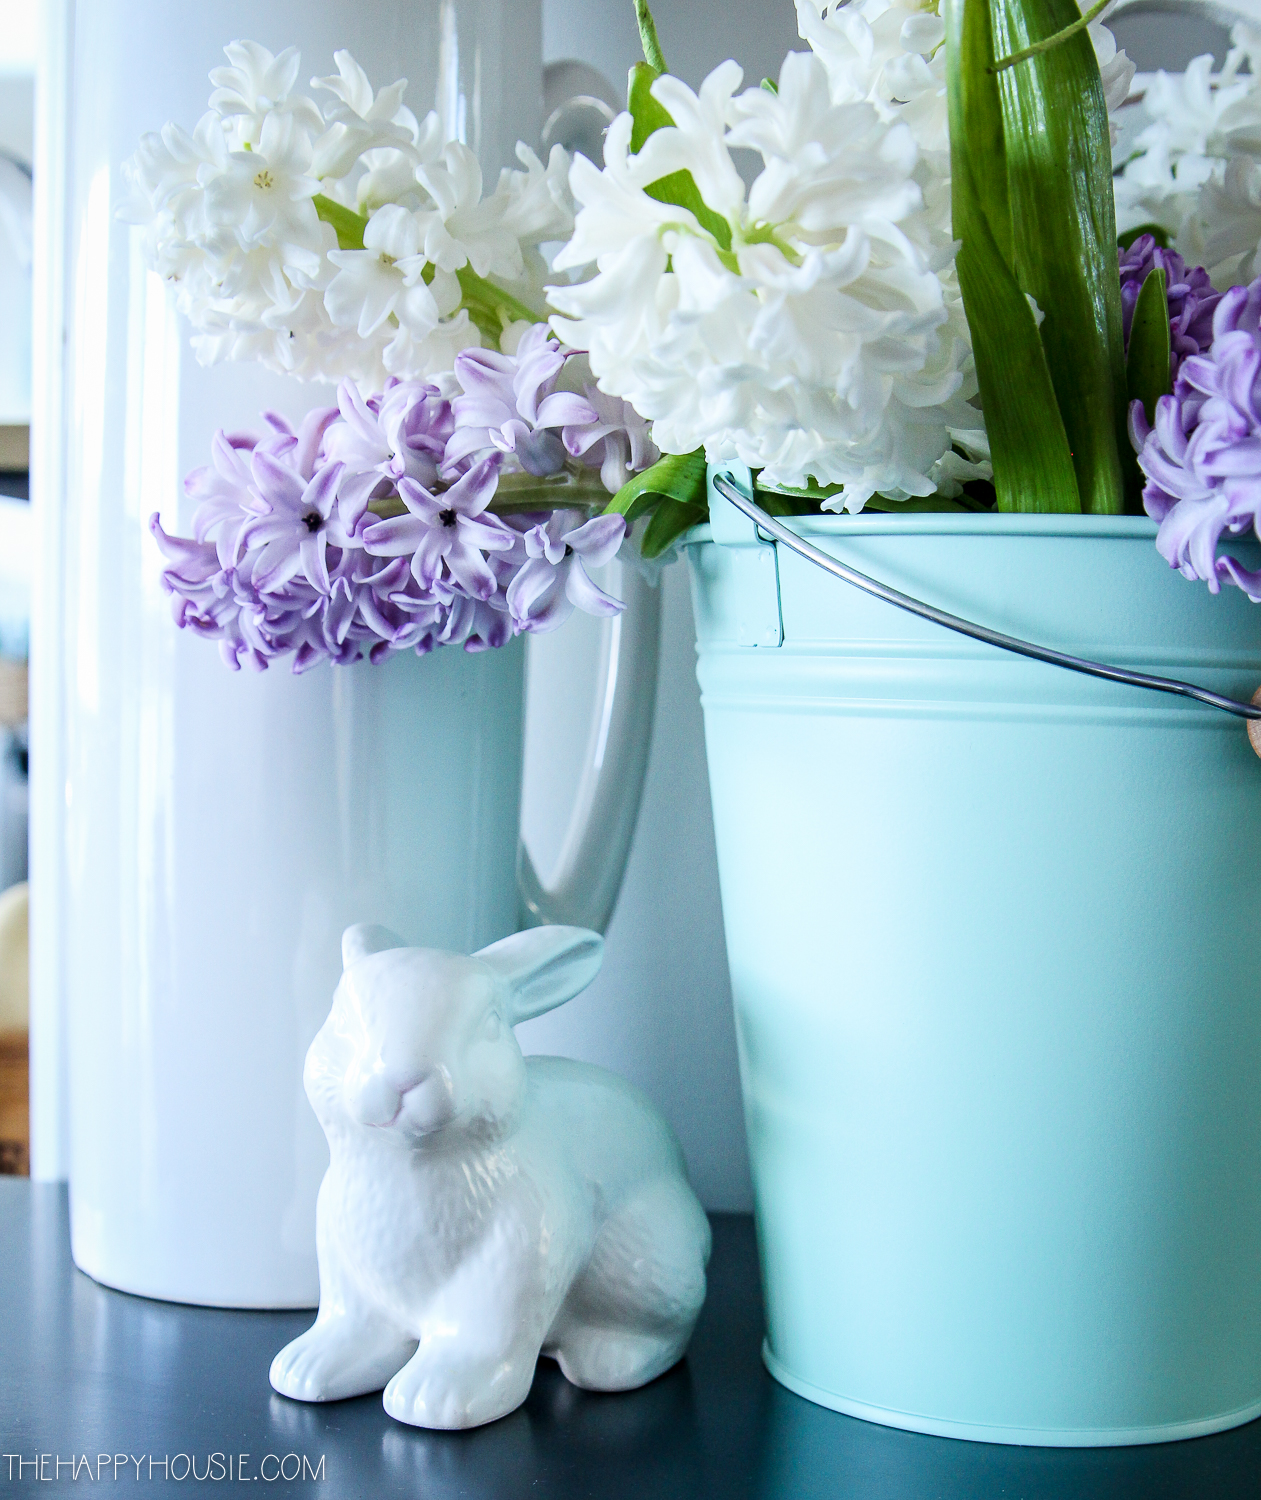 A white Easter bunny beside the blue pail with flowers.